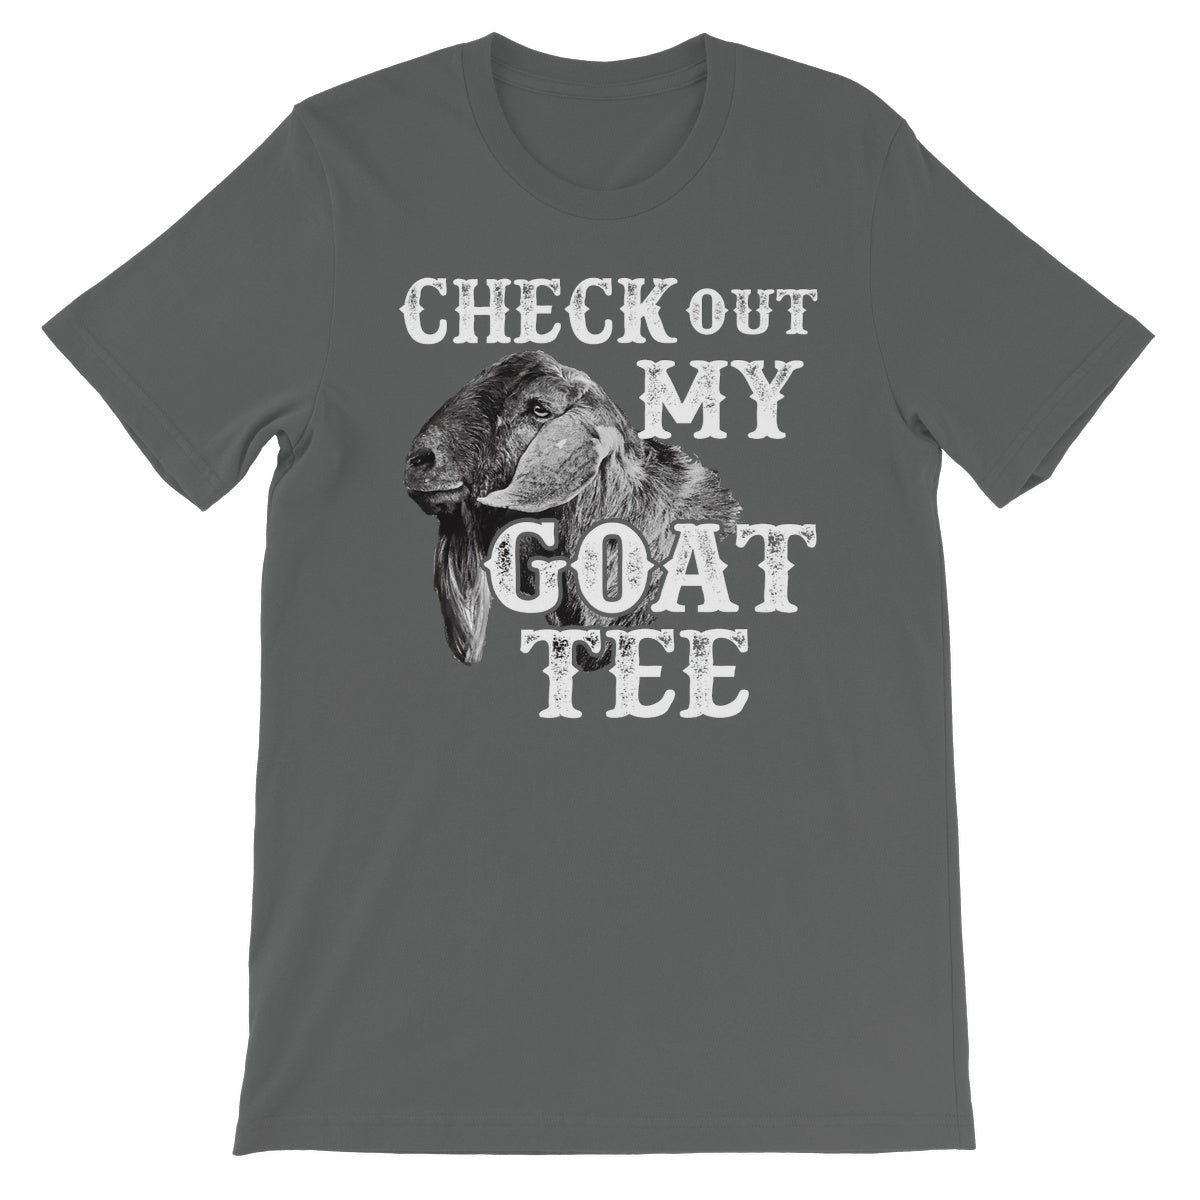 Check Out My Goat Tee Unisex Short Sleeve T-Shirt